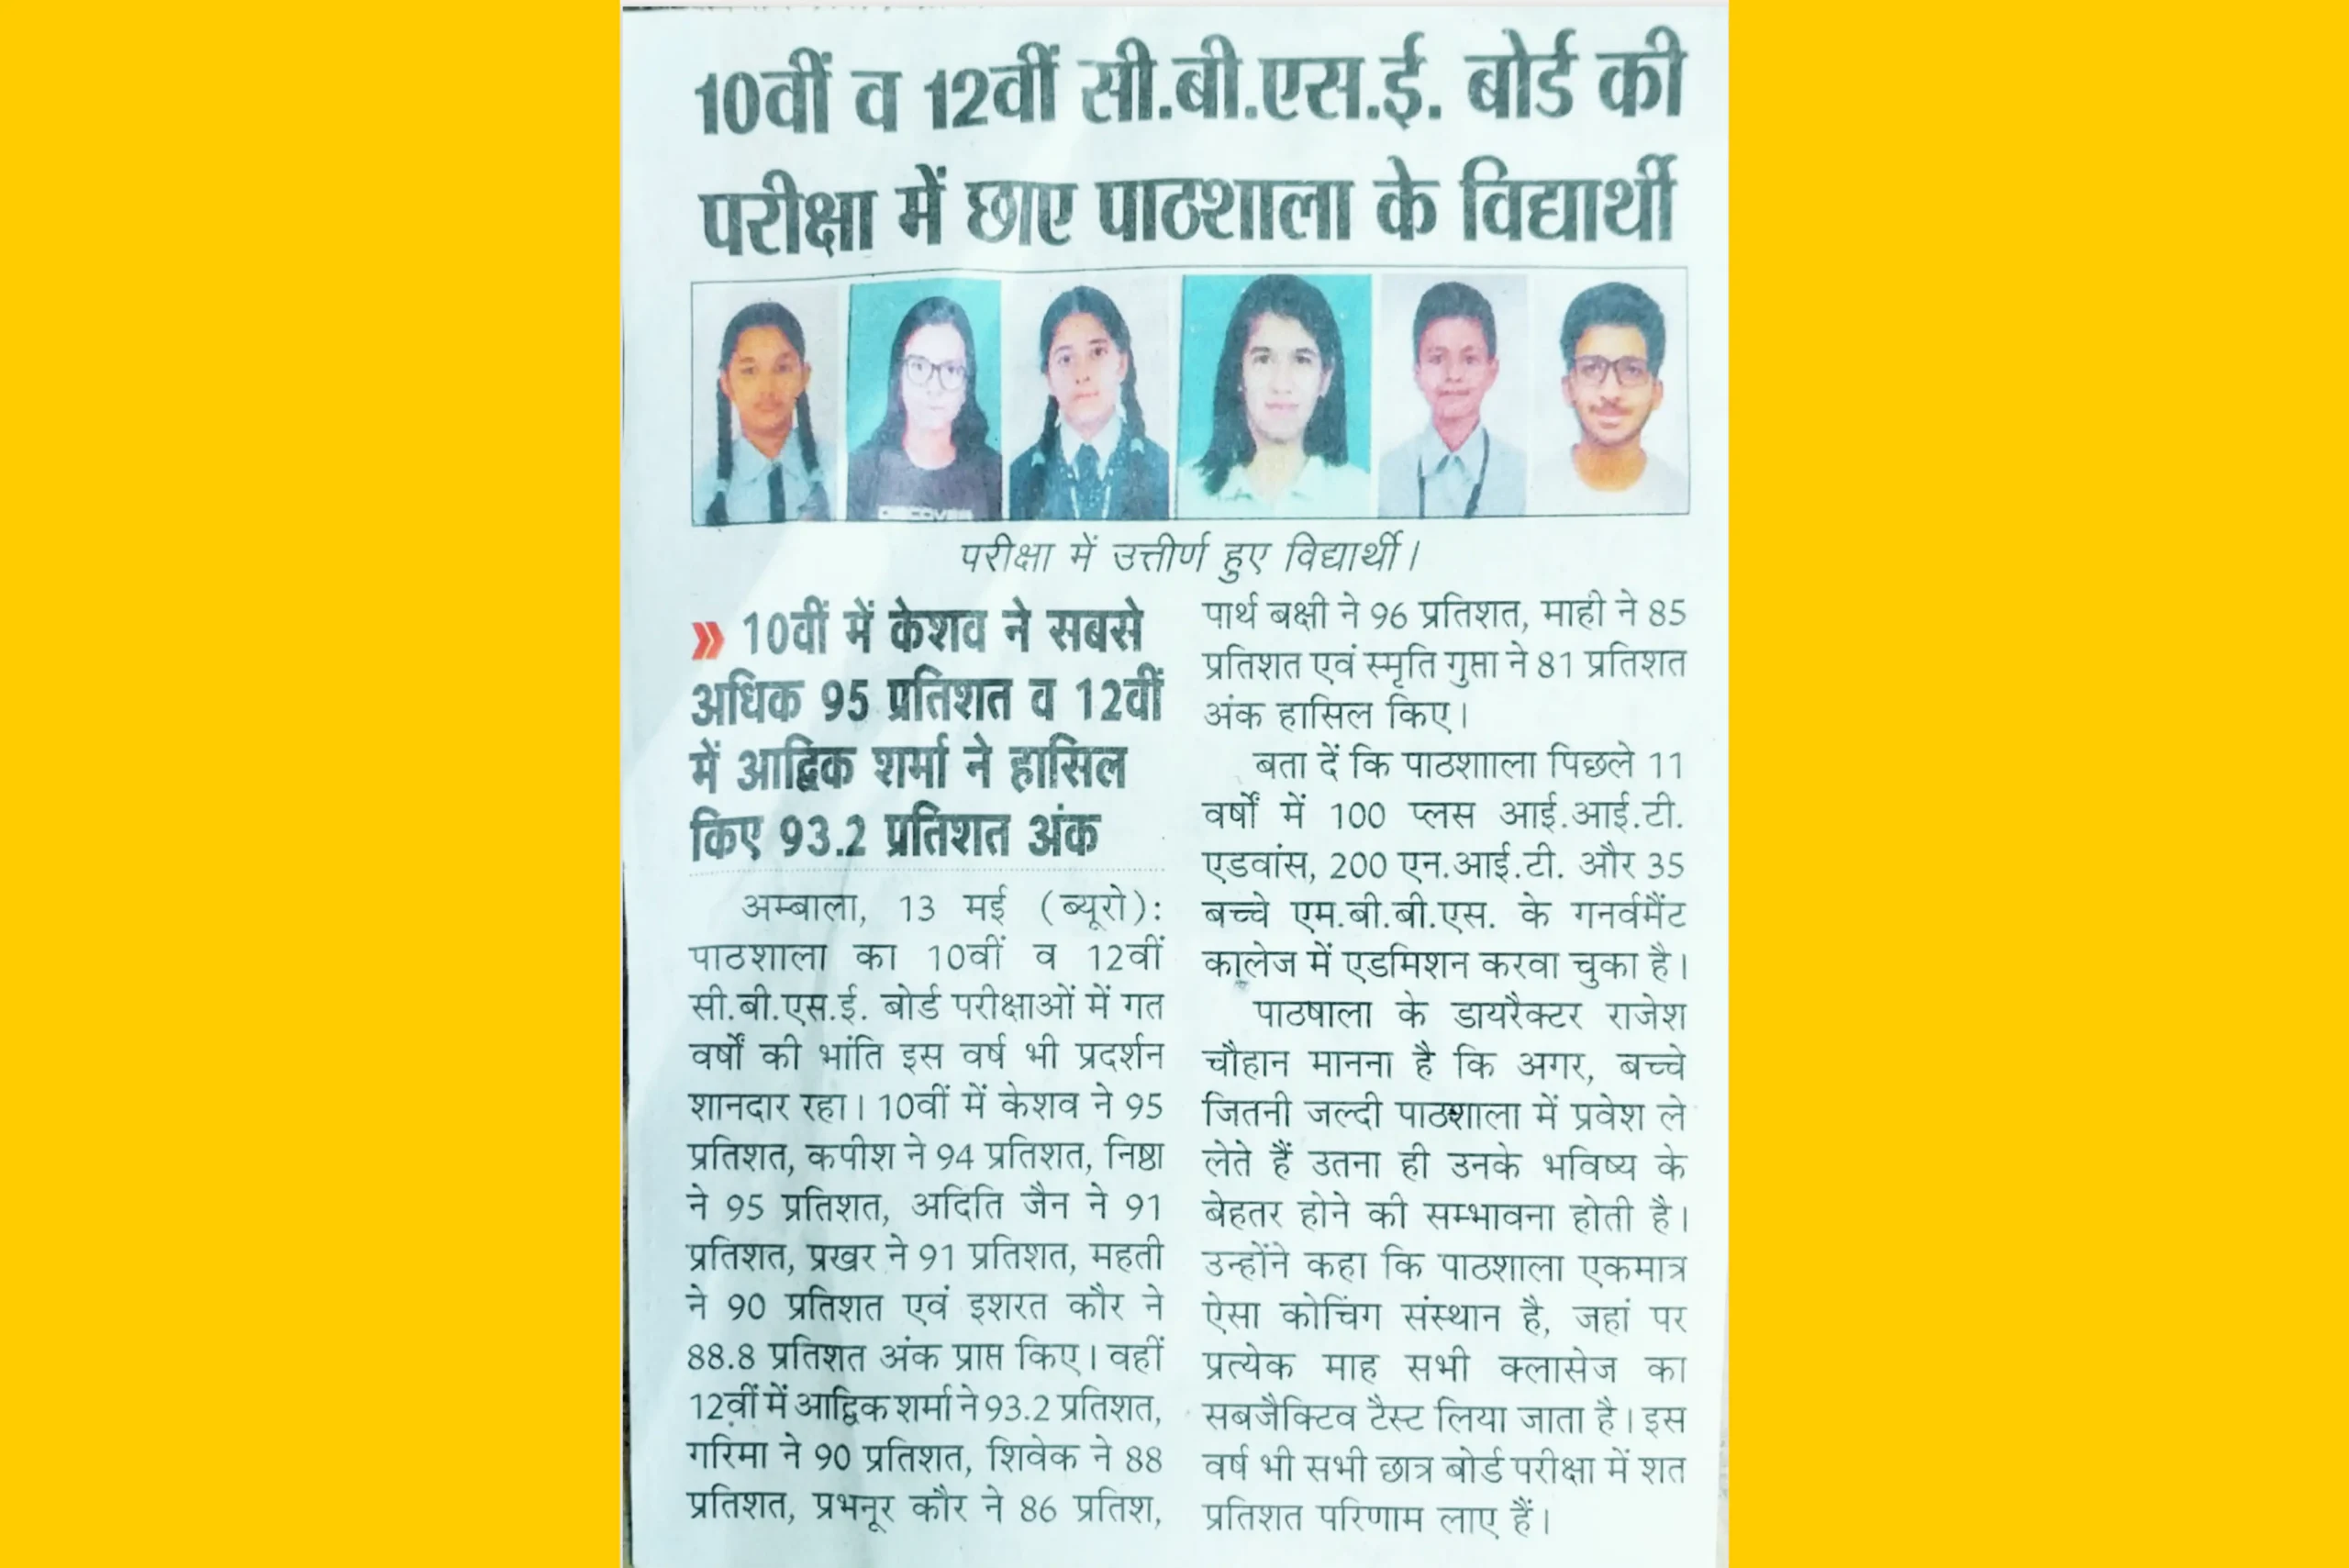 Paathshala Coaching results featured in newspaper 7